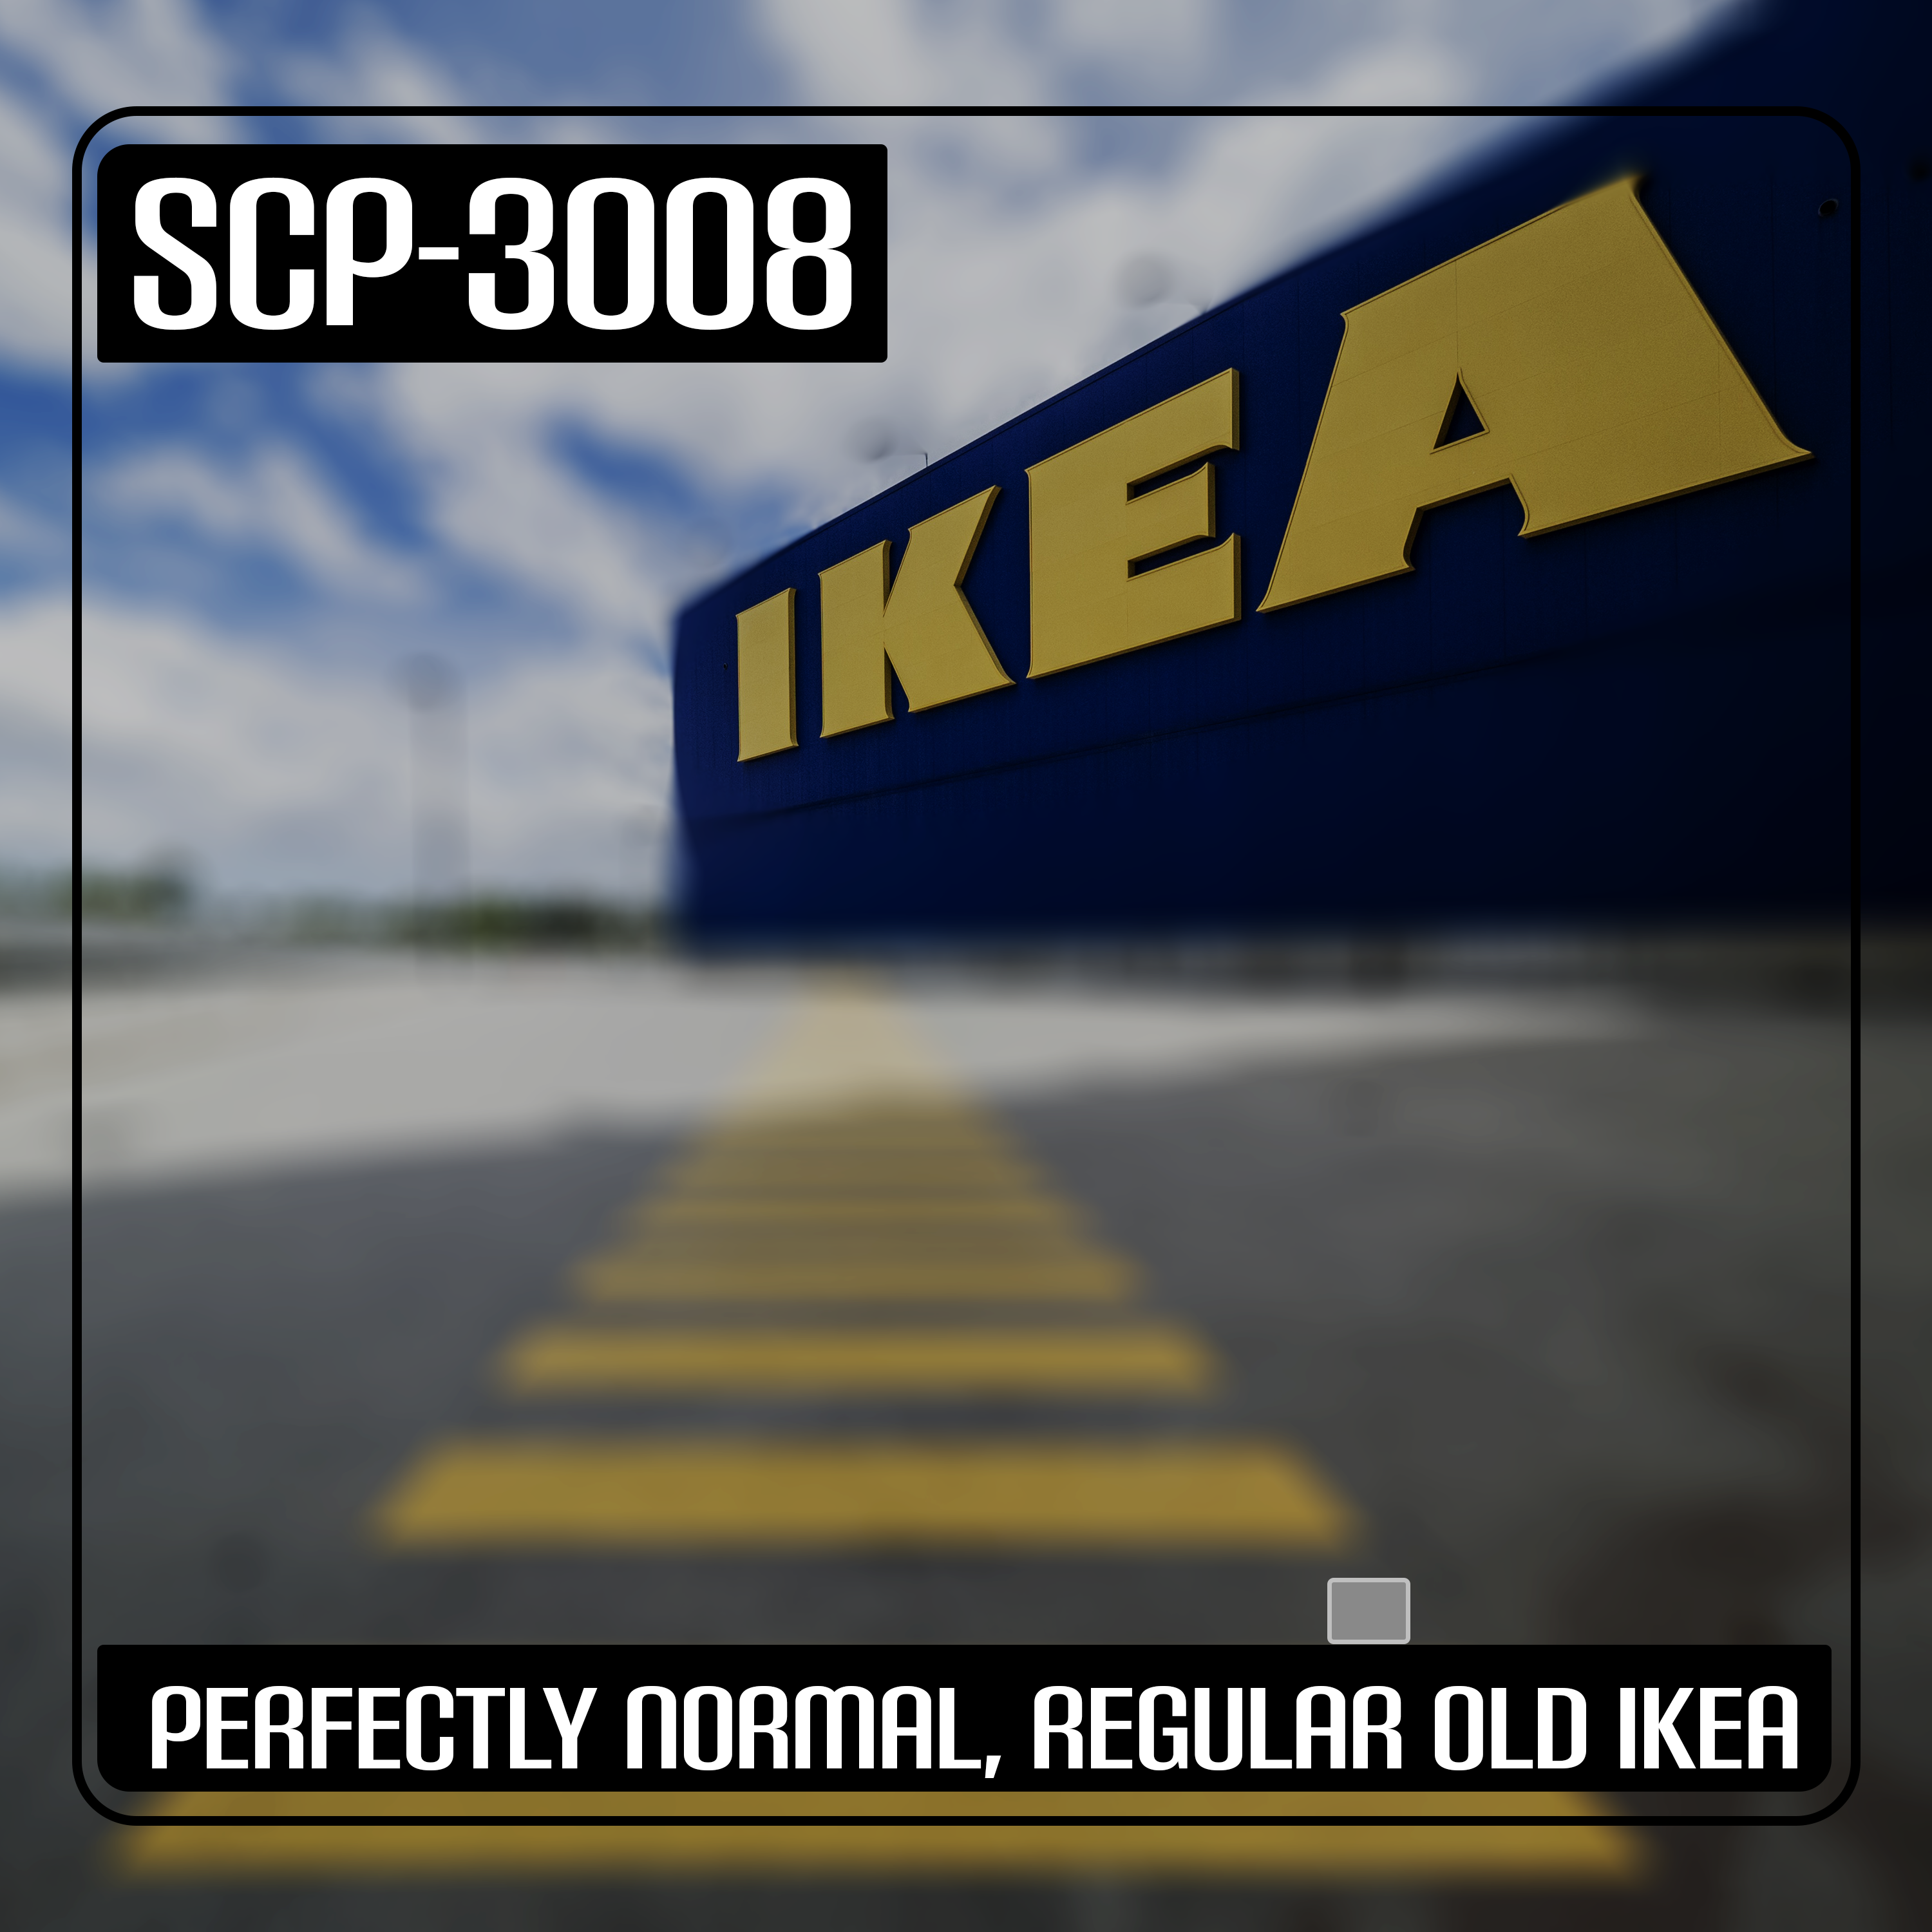 Scp 3008 Perfectly Normal Ikea Scp Archives Podcast Podtail